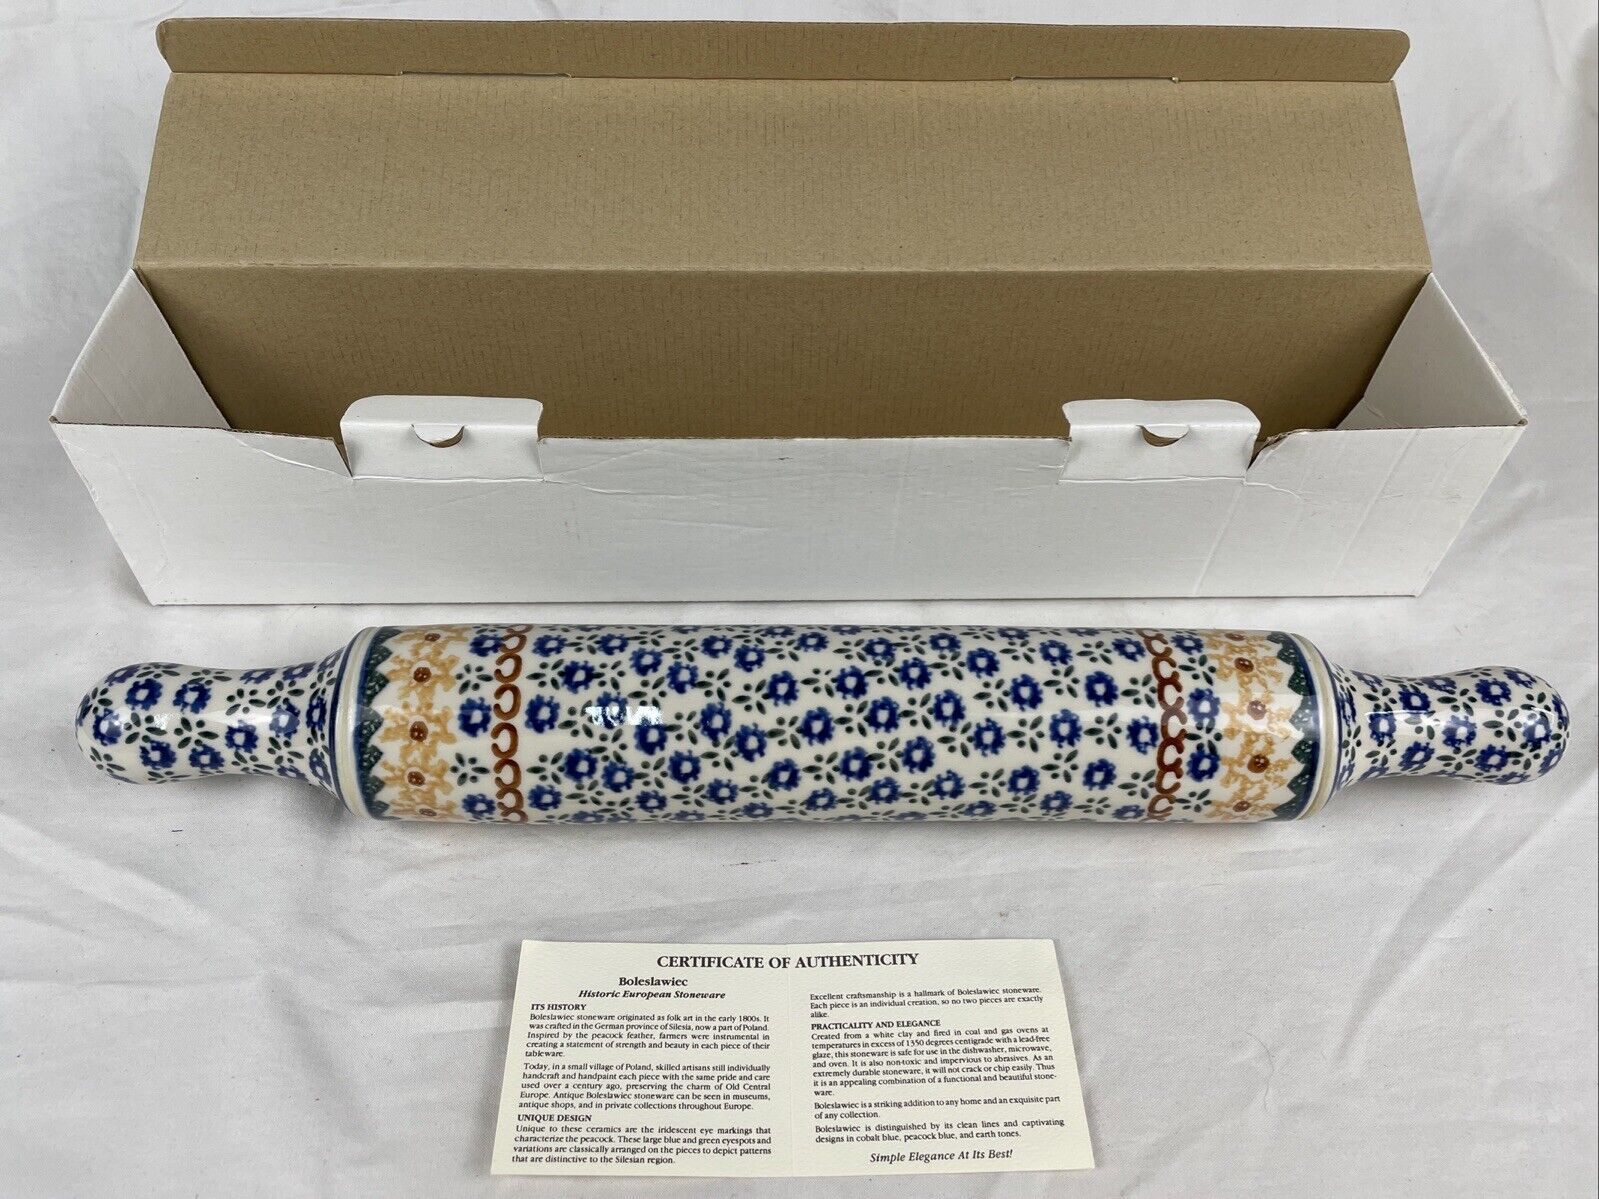 Hand Painted Polish Pottery Rolling Pin with Certificate of Authenticity New